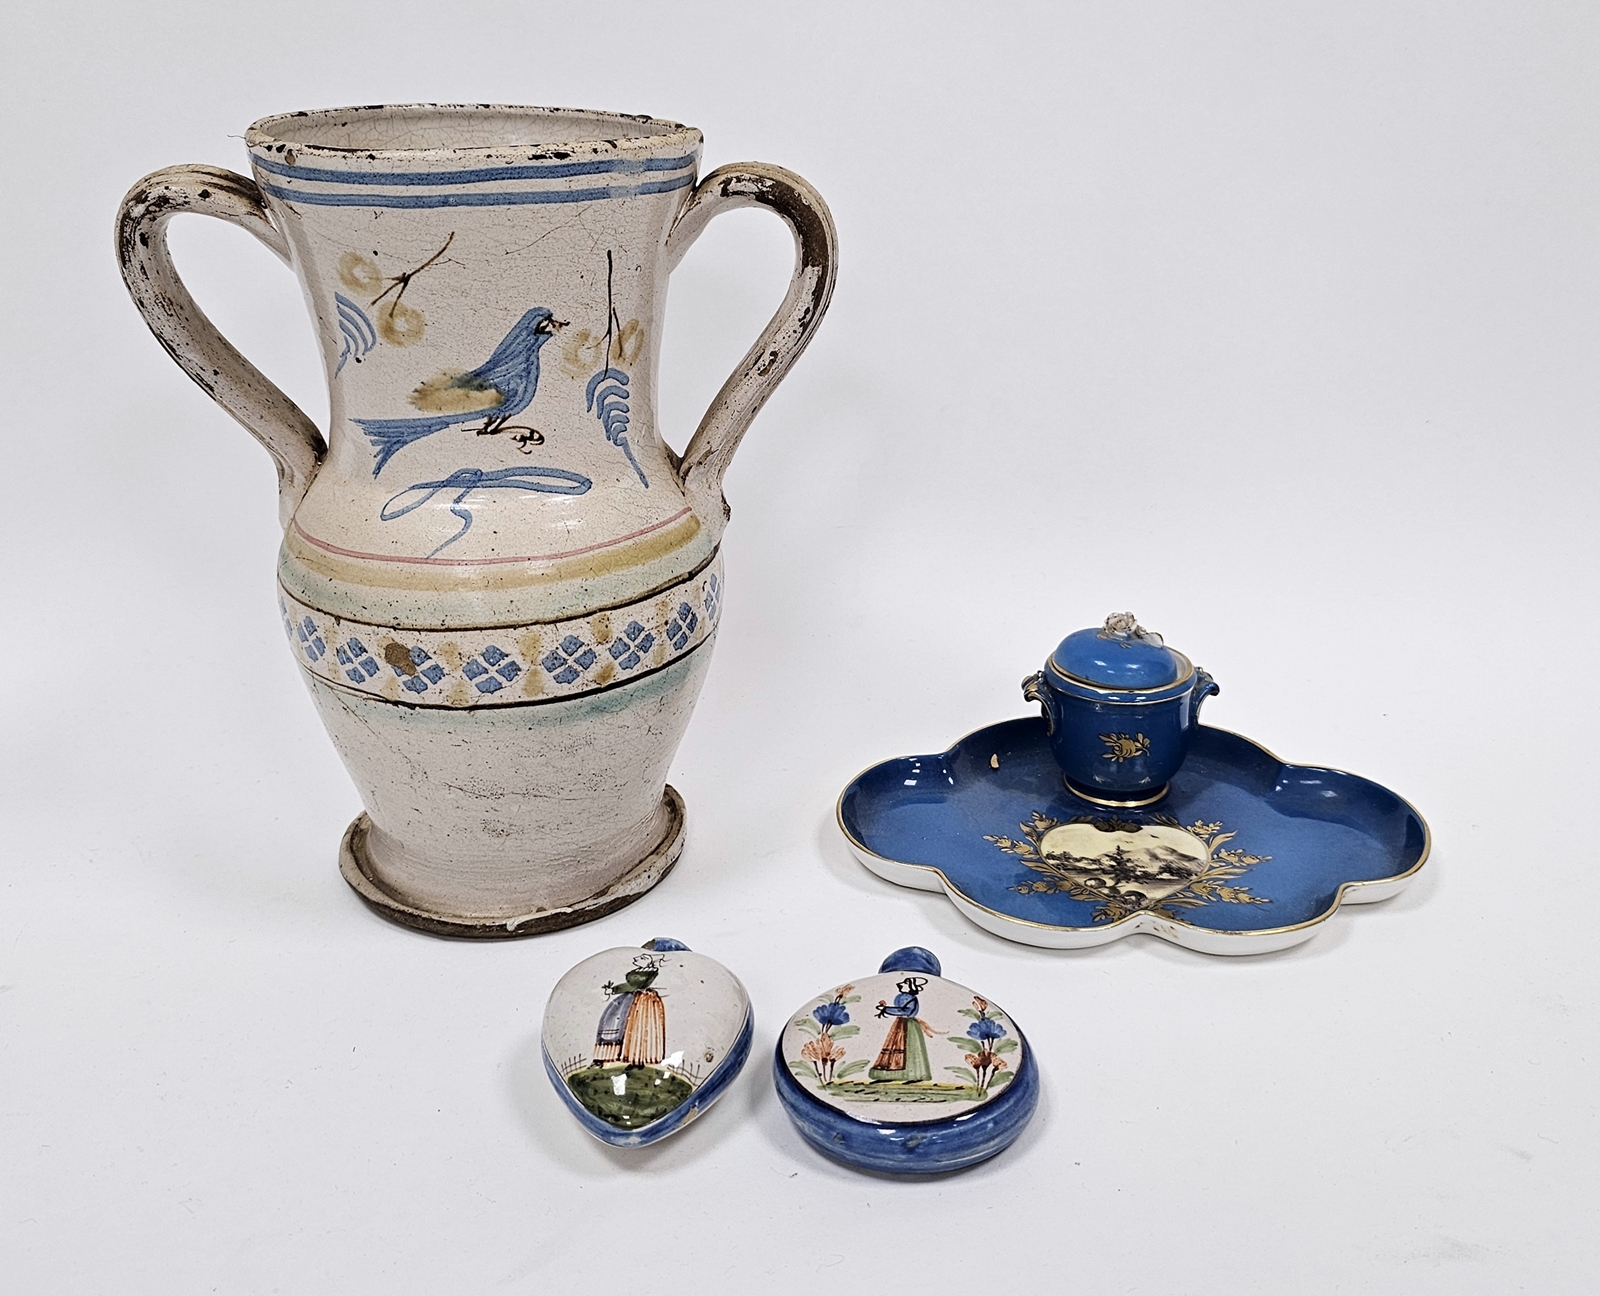 Collection of Continental pottery and porcelain, 19th century and later, including a Sevres-style